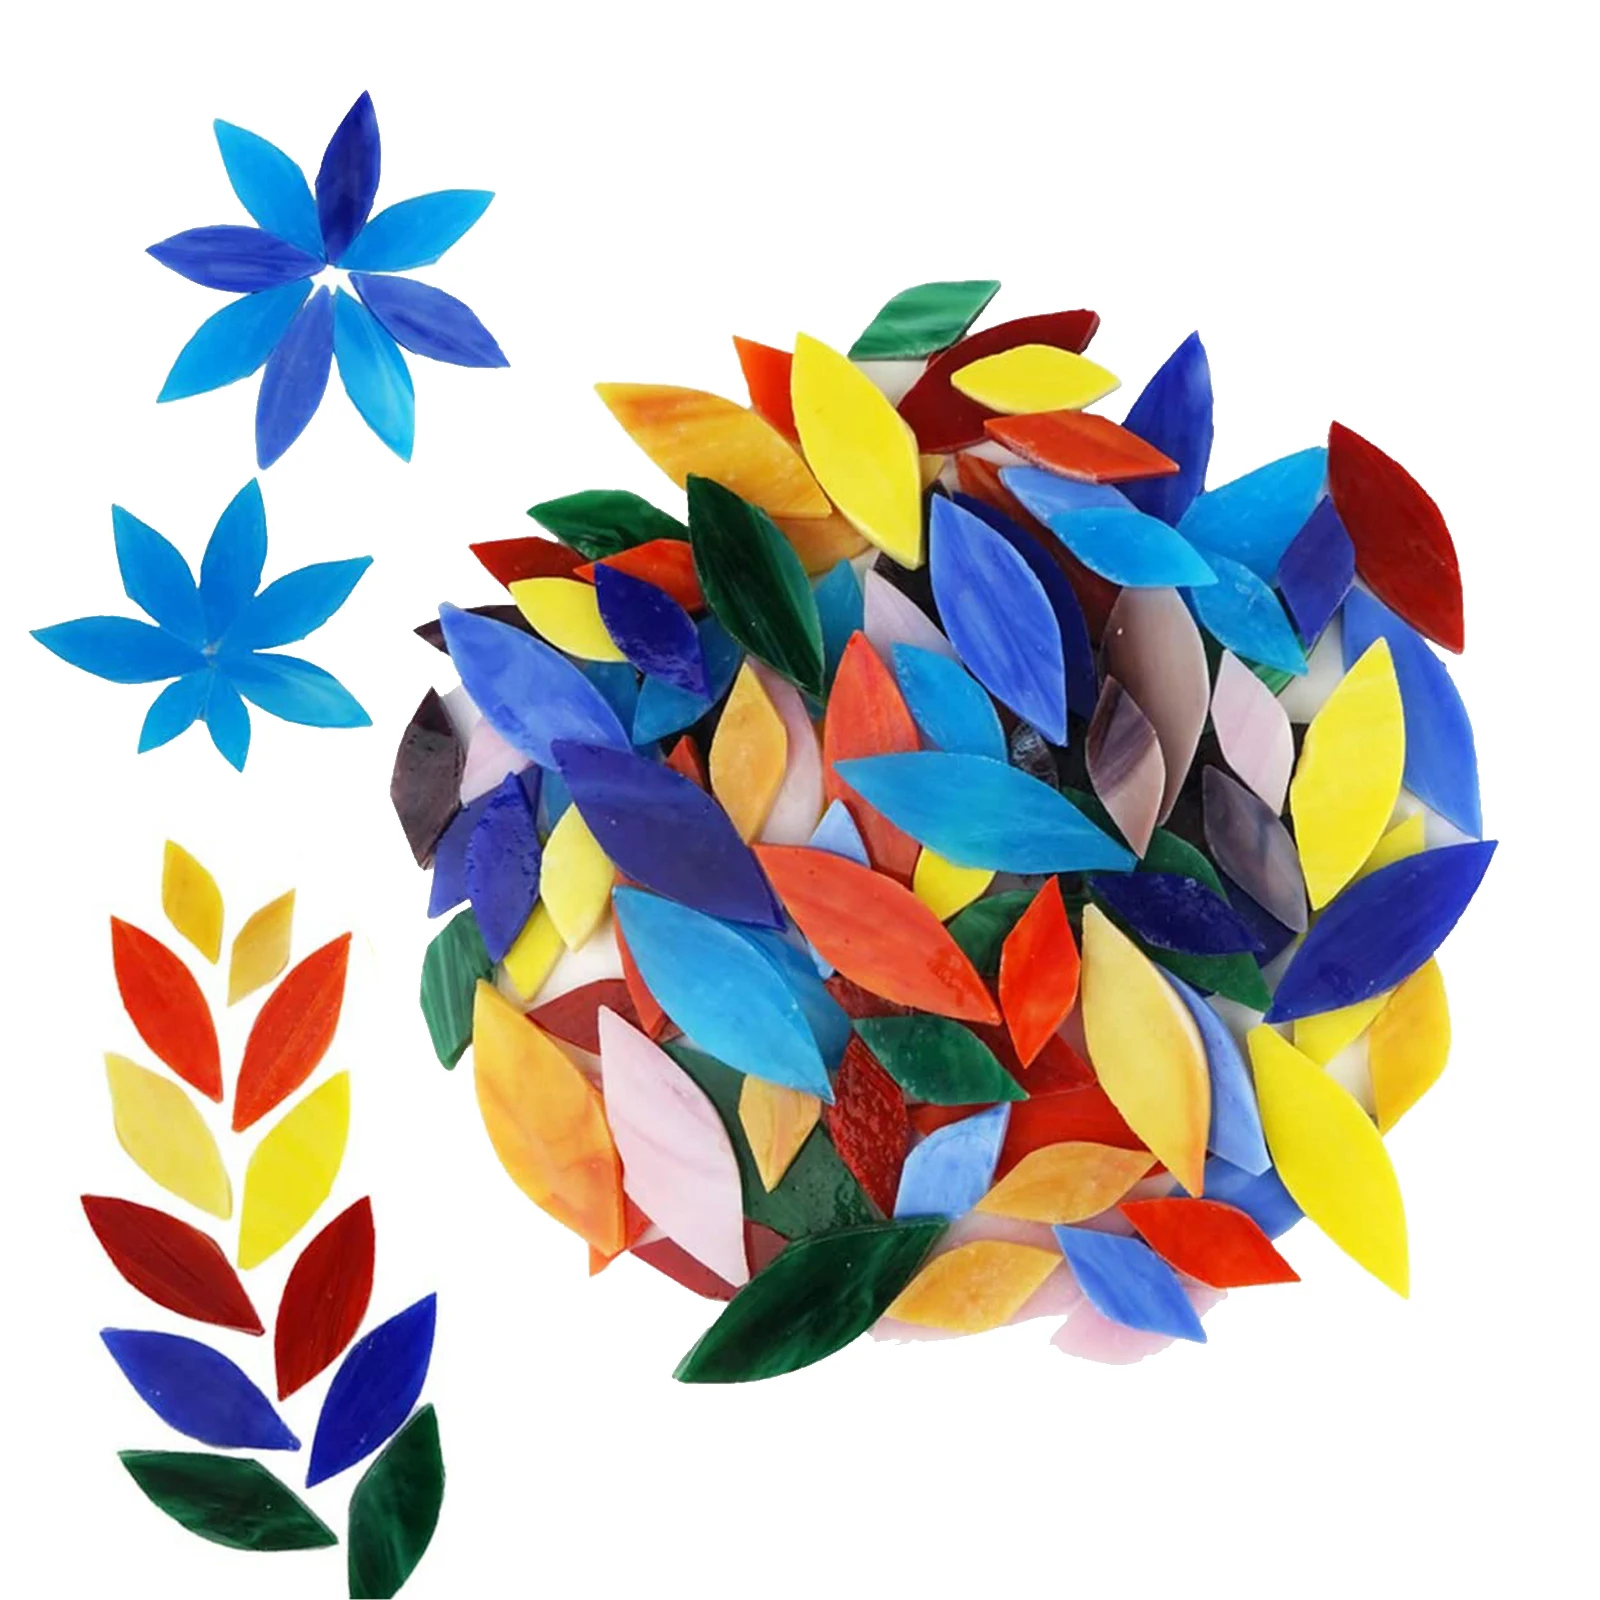 100x Mosaic Tiles for Crafts Bulk Stained Glass Supplies Crafts Petal Leaves Mosaic Stained Glass Pieces for Home Decoration or Crafts, Size: 0.32 cm